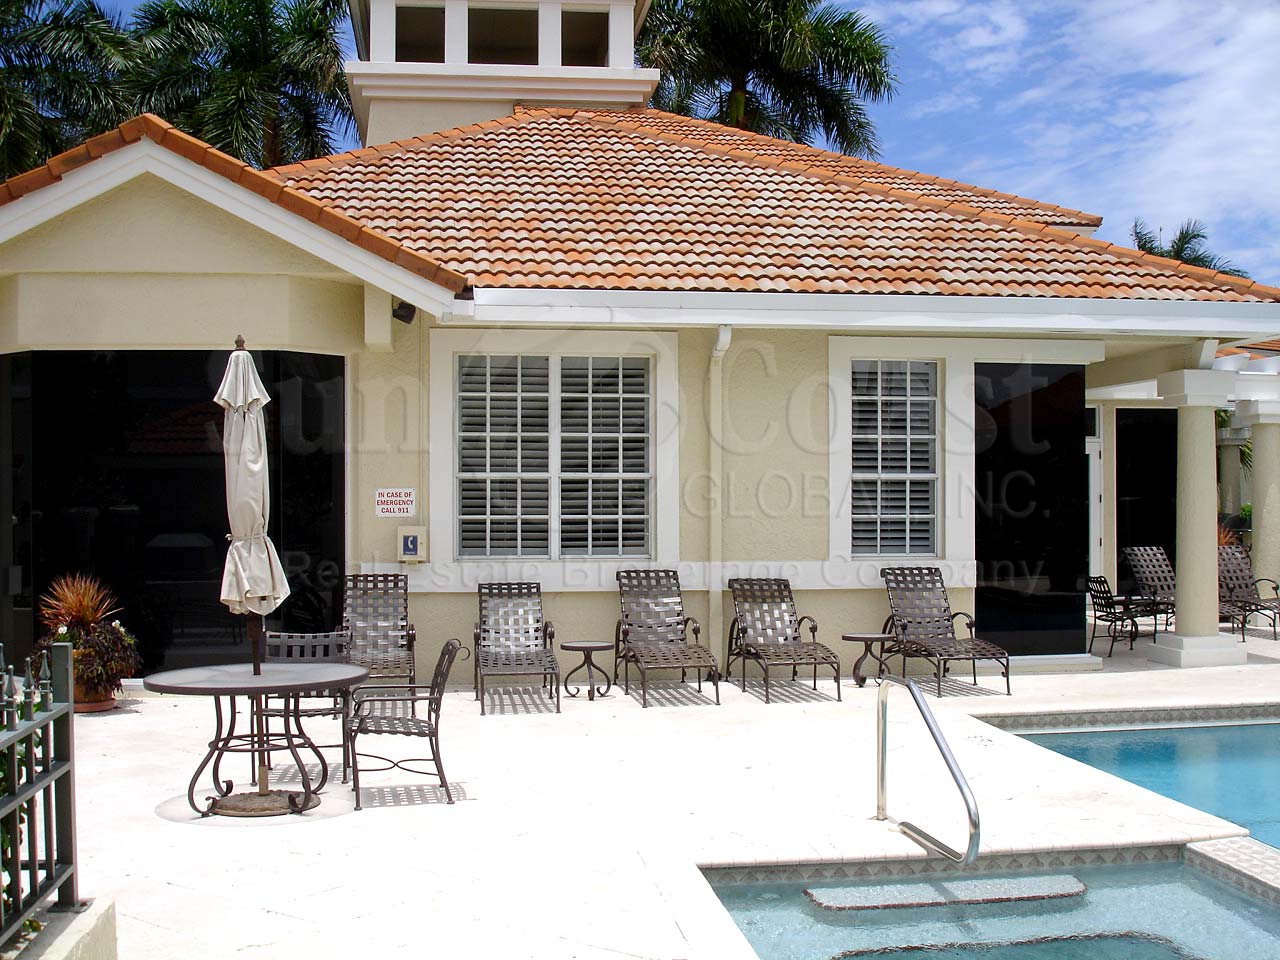 Colonade Community Pool and Clubhouse